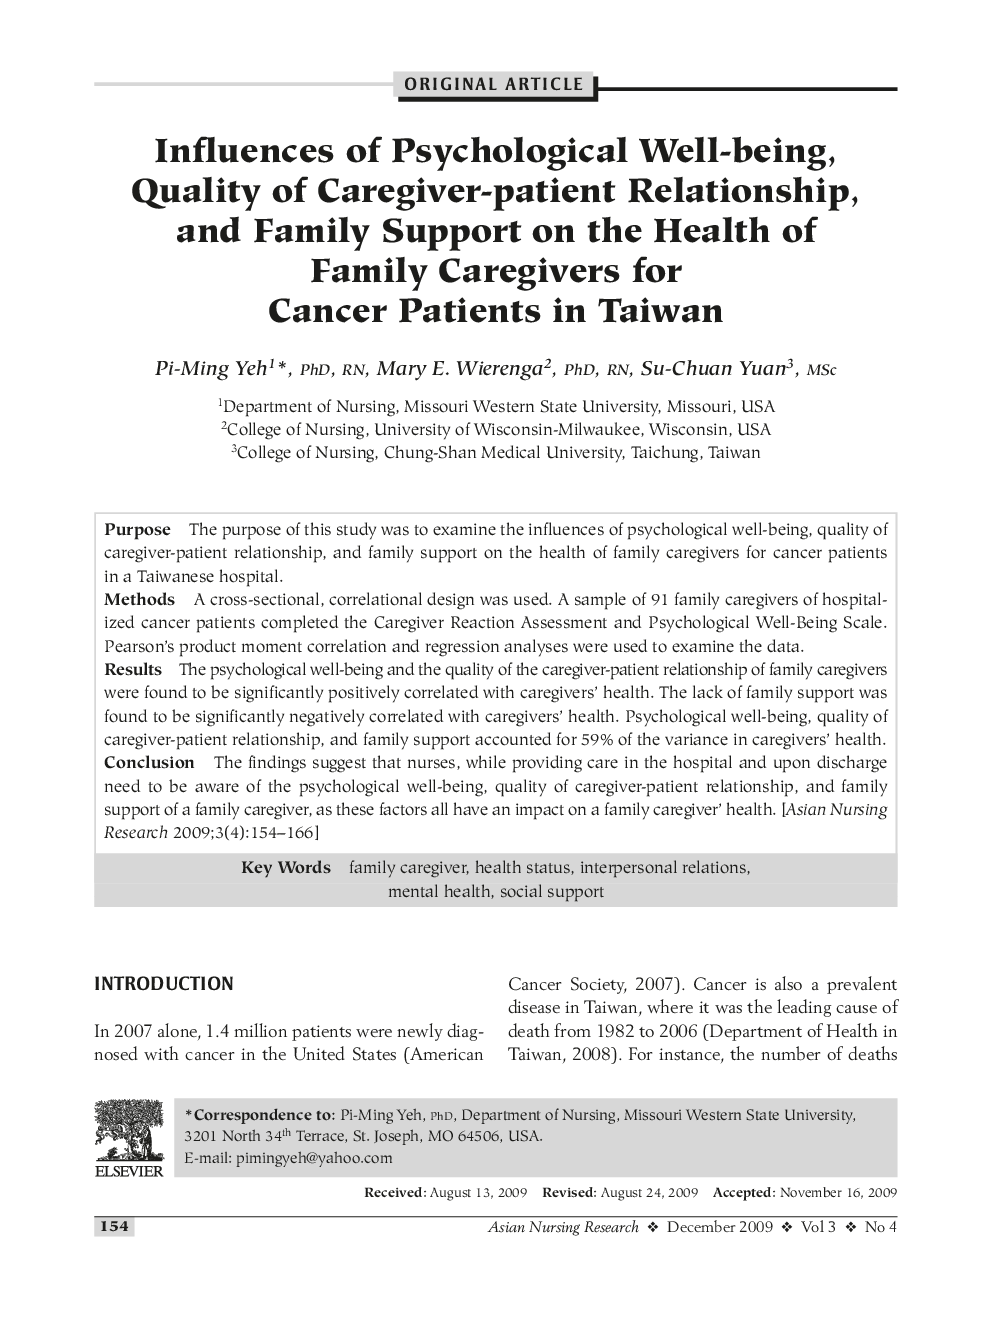 Influences of Psychological Well-being, Quality of Caregiver-patient Relationship, and Family Support on the Health of Family Caregivers for Cancer Patients in Taiwan